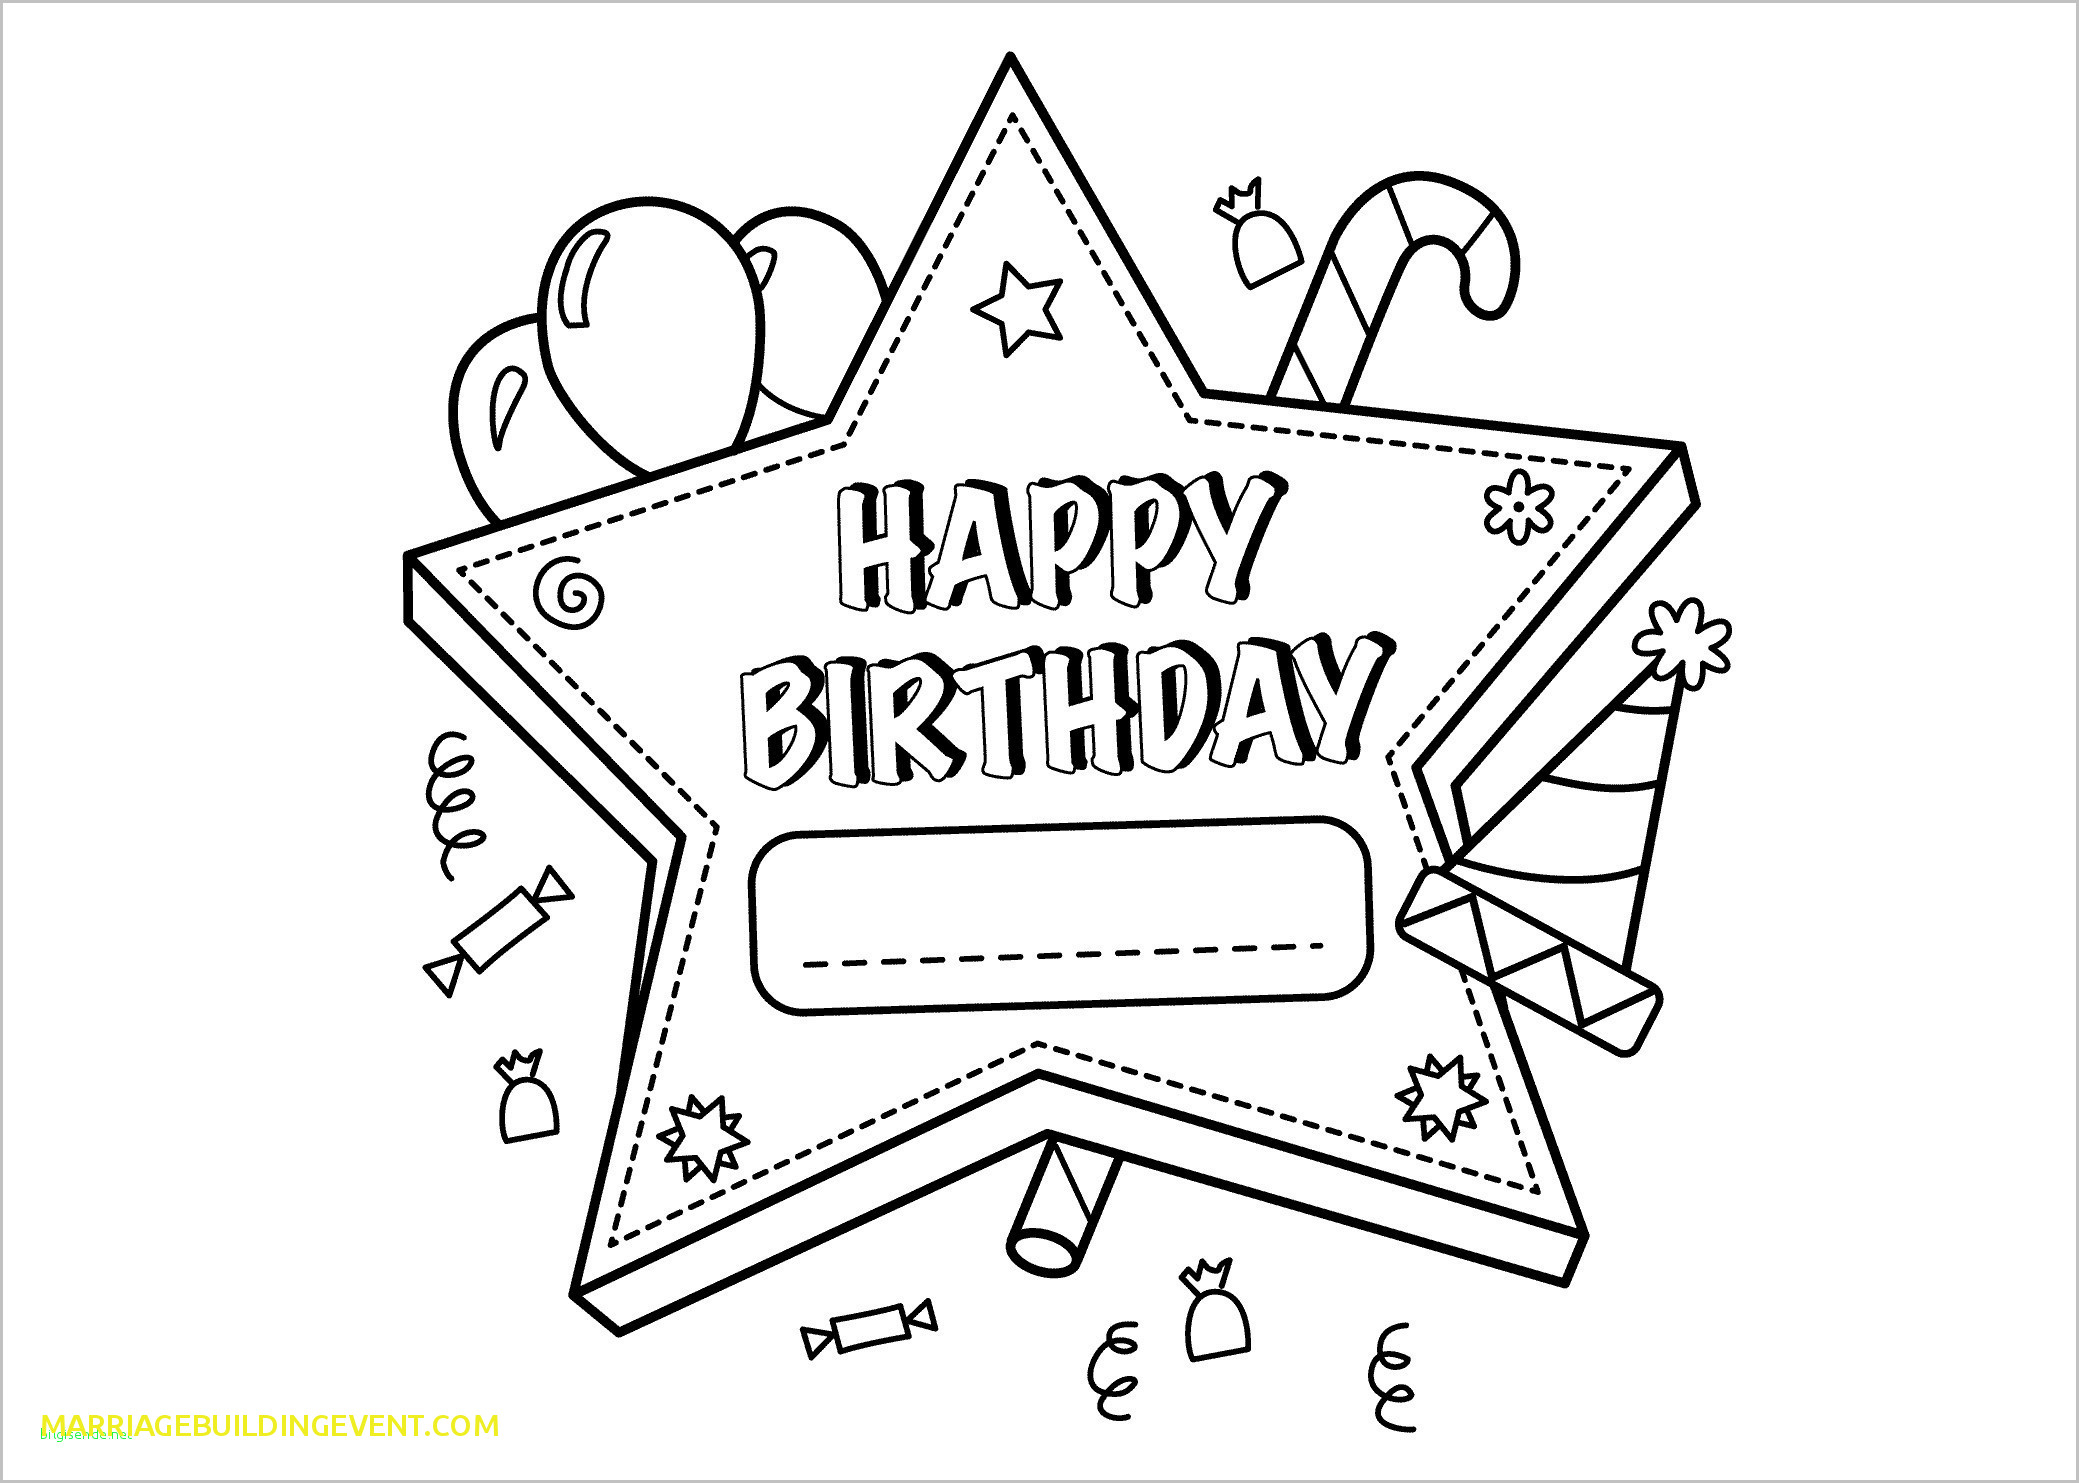 Coloring Pages For Birthday Happy Birthday Mickey Mouse Coloring Pages Awesome Mickey Mouse